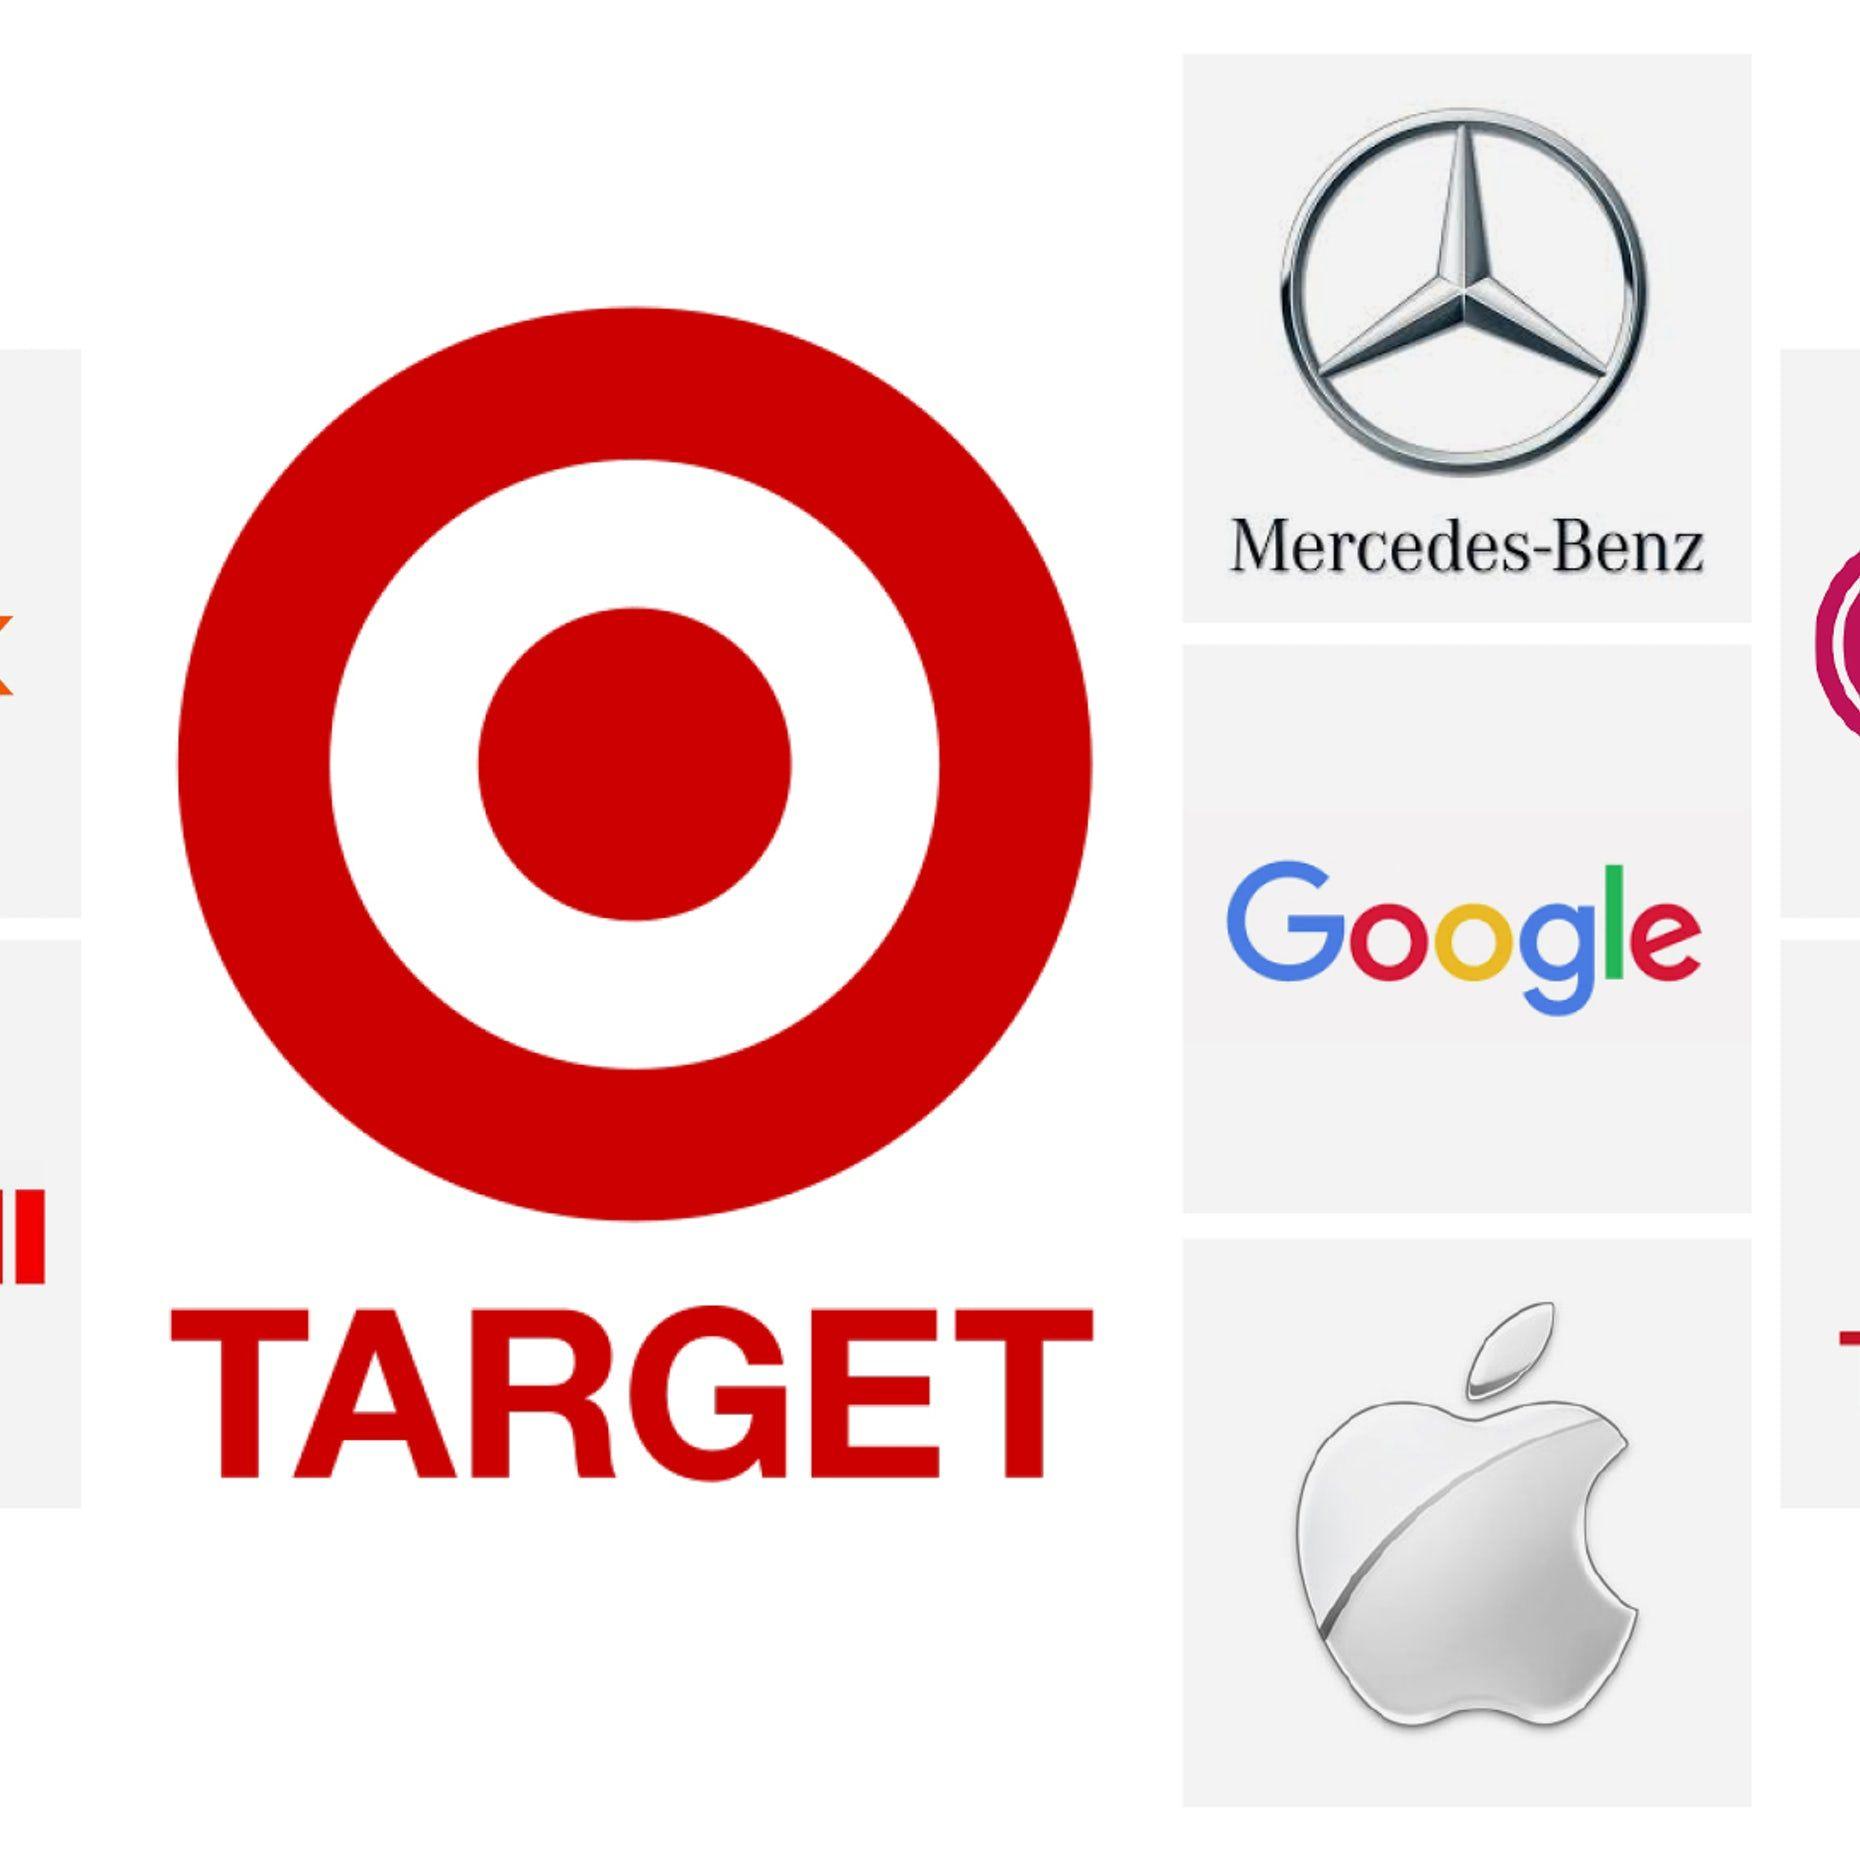 Learn Logo - Top 10 of the world's most famous logos and what you can learn from ...